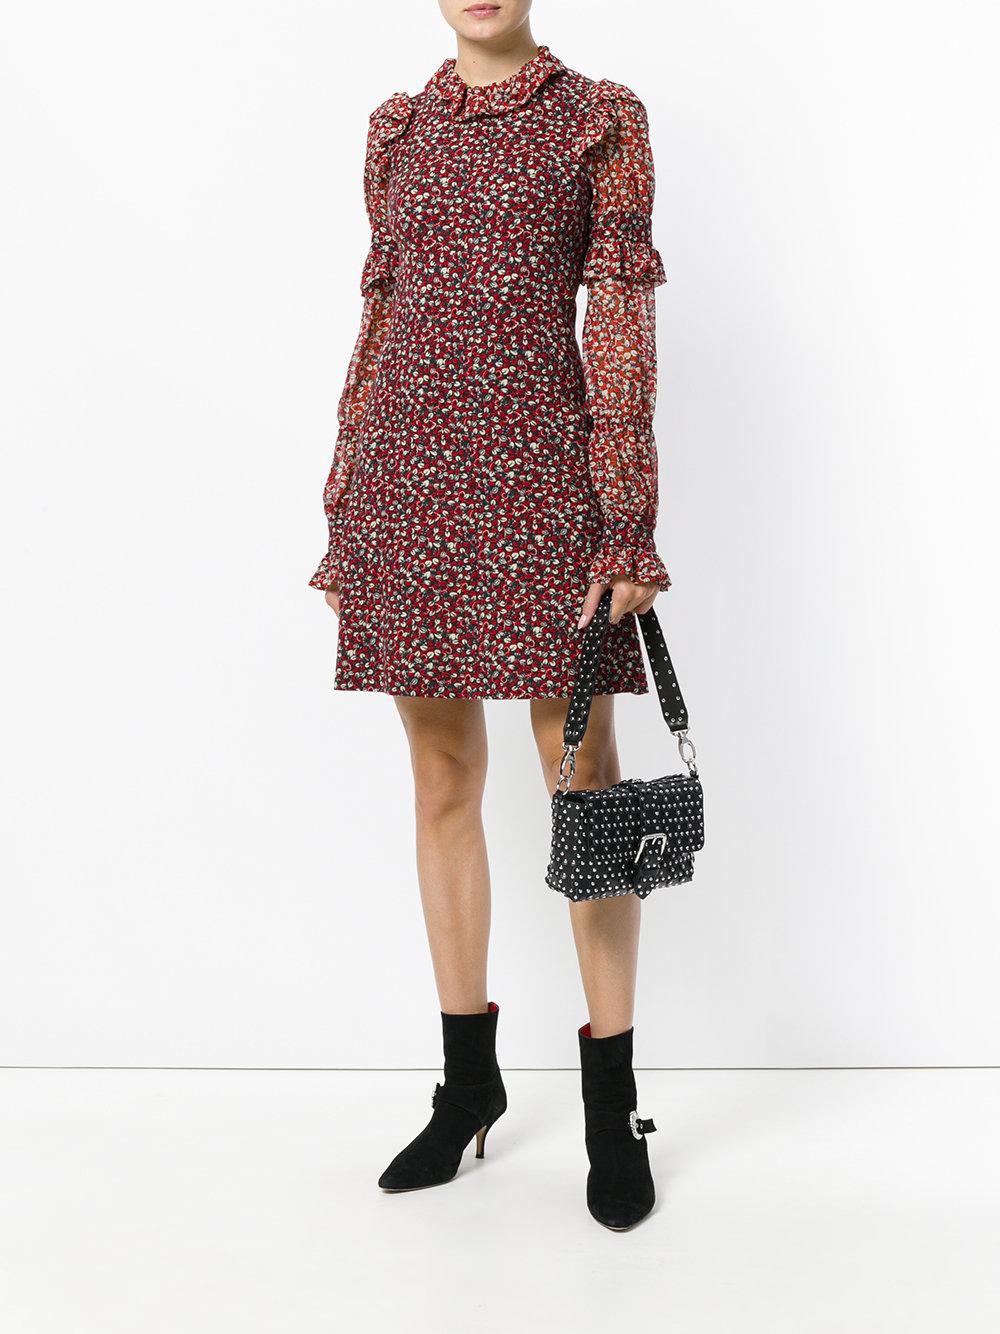 RED Valentino Leather Flower Puzzle Shoulder Bag in Black - Lyst